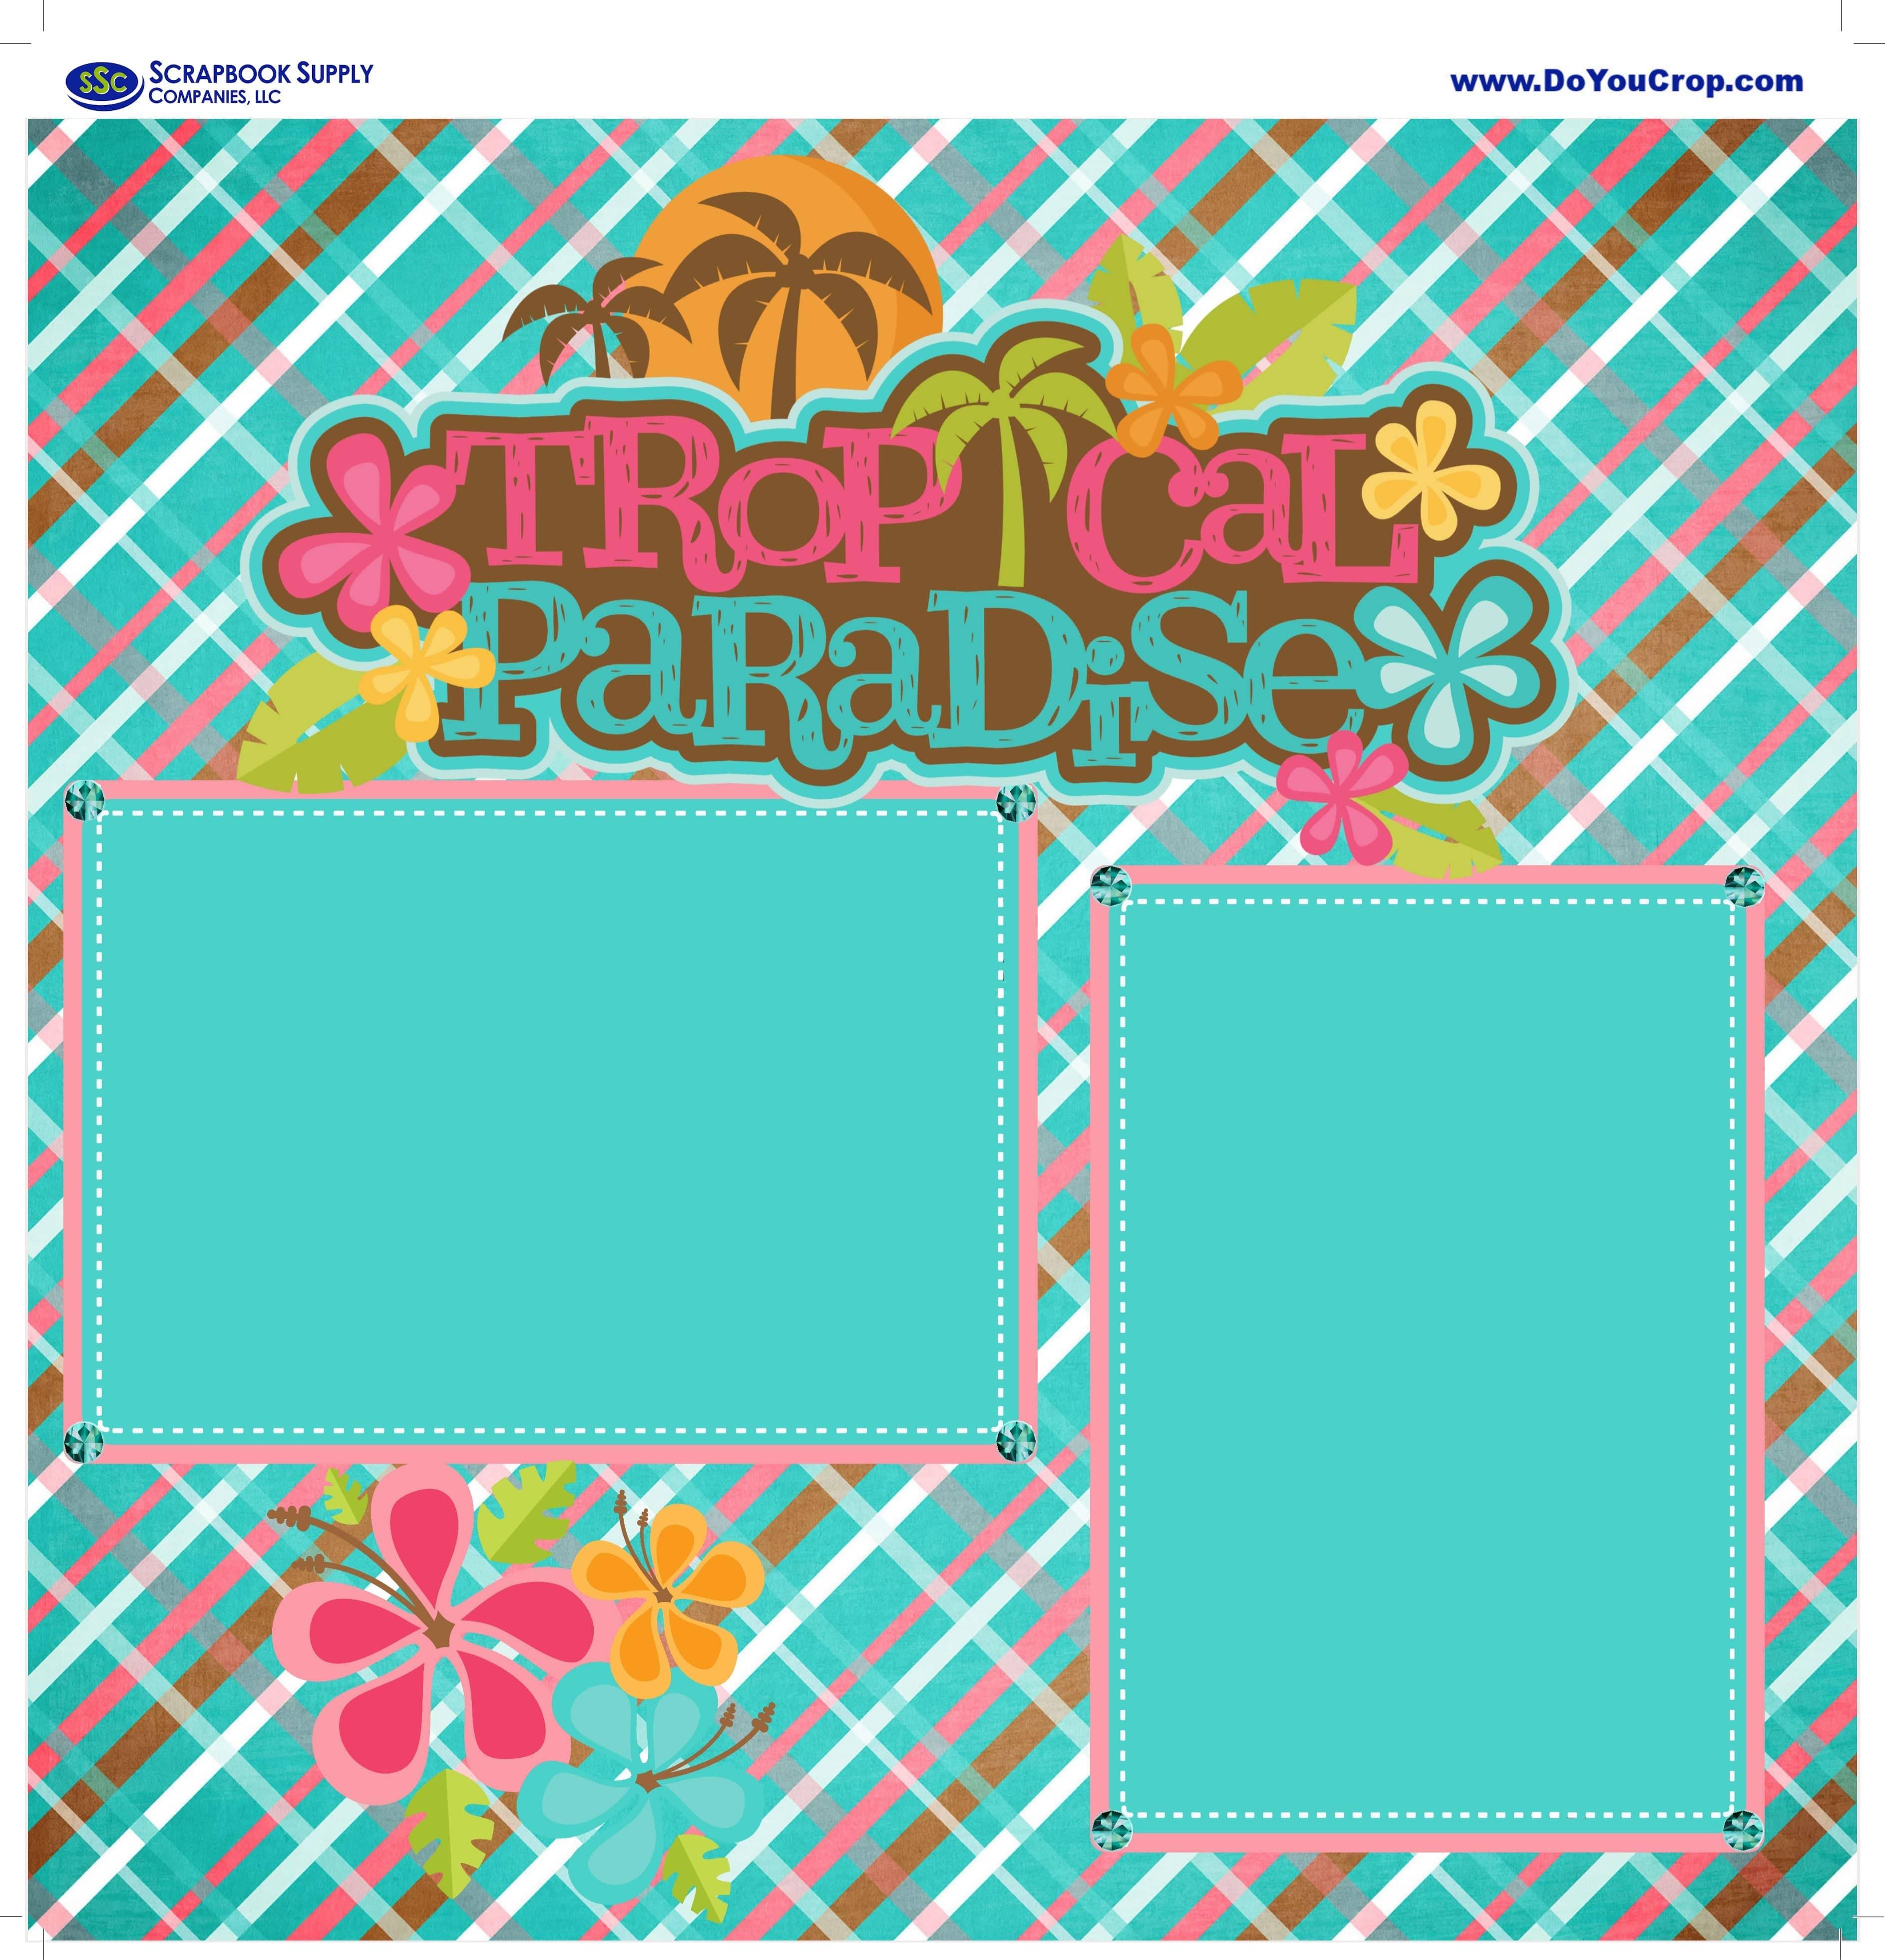 Tropical Paradise (2) - 12 x 12 Premade, Printed Scrapbook Pages by SSC Designs - Scrapbook Supply Companies